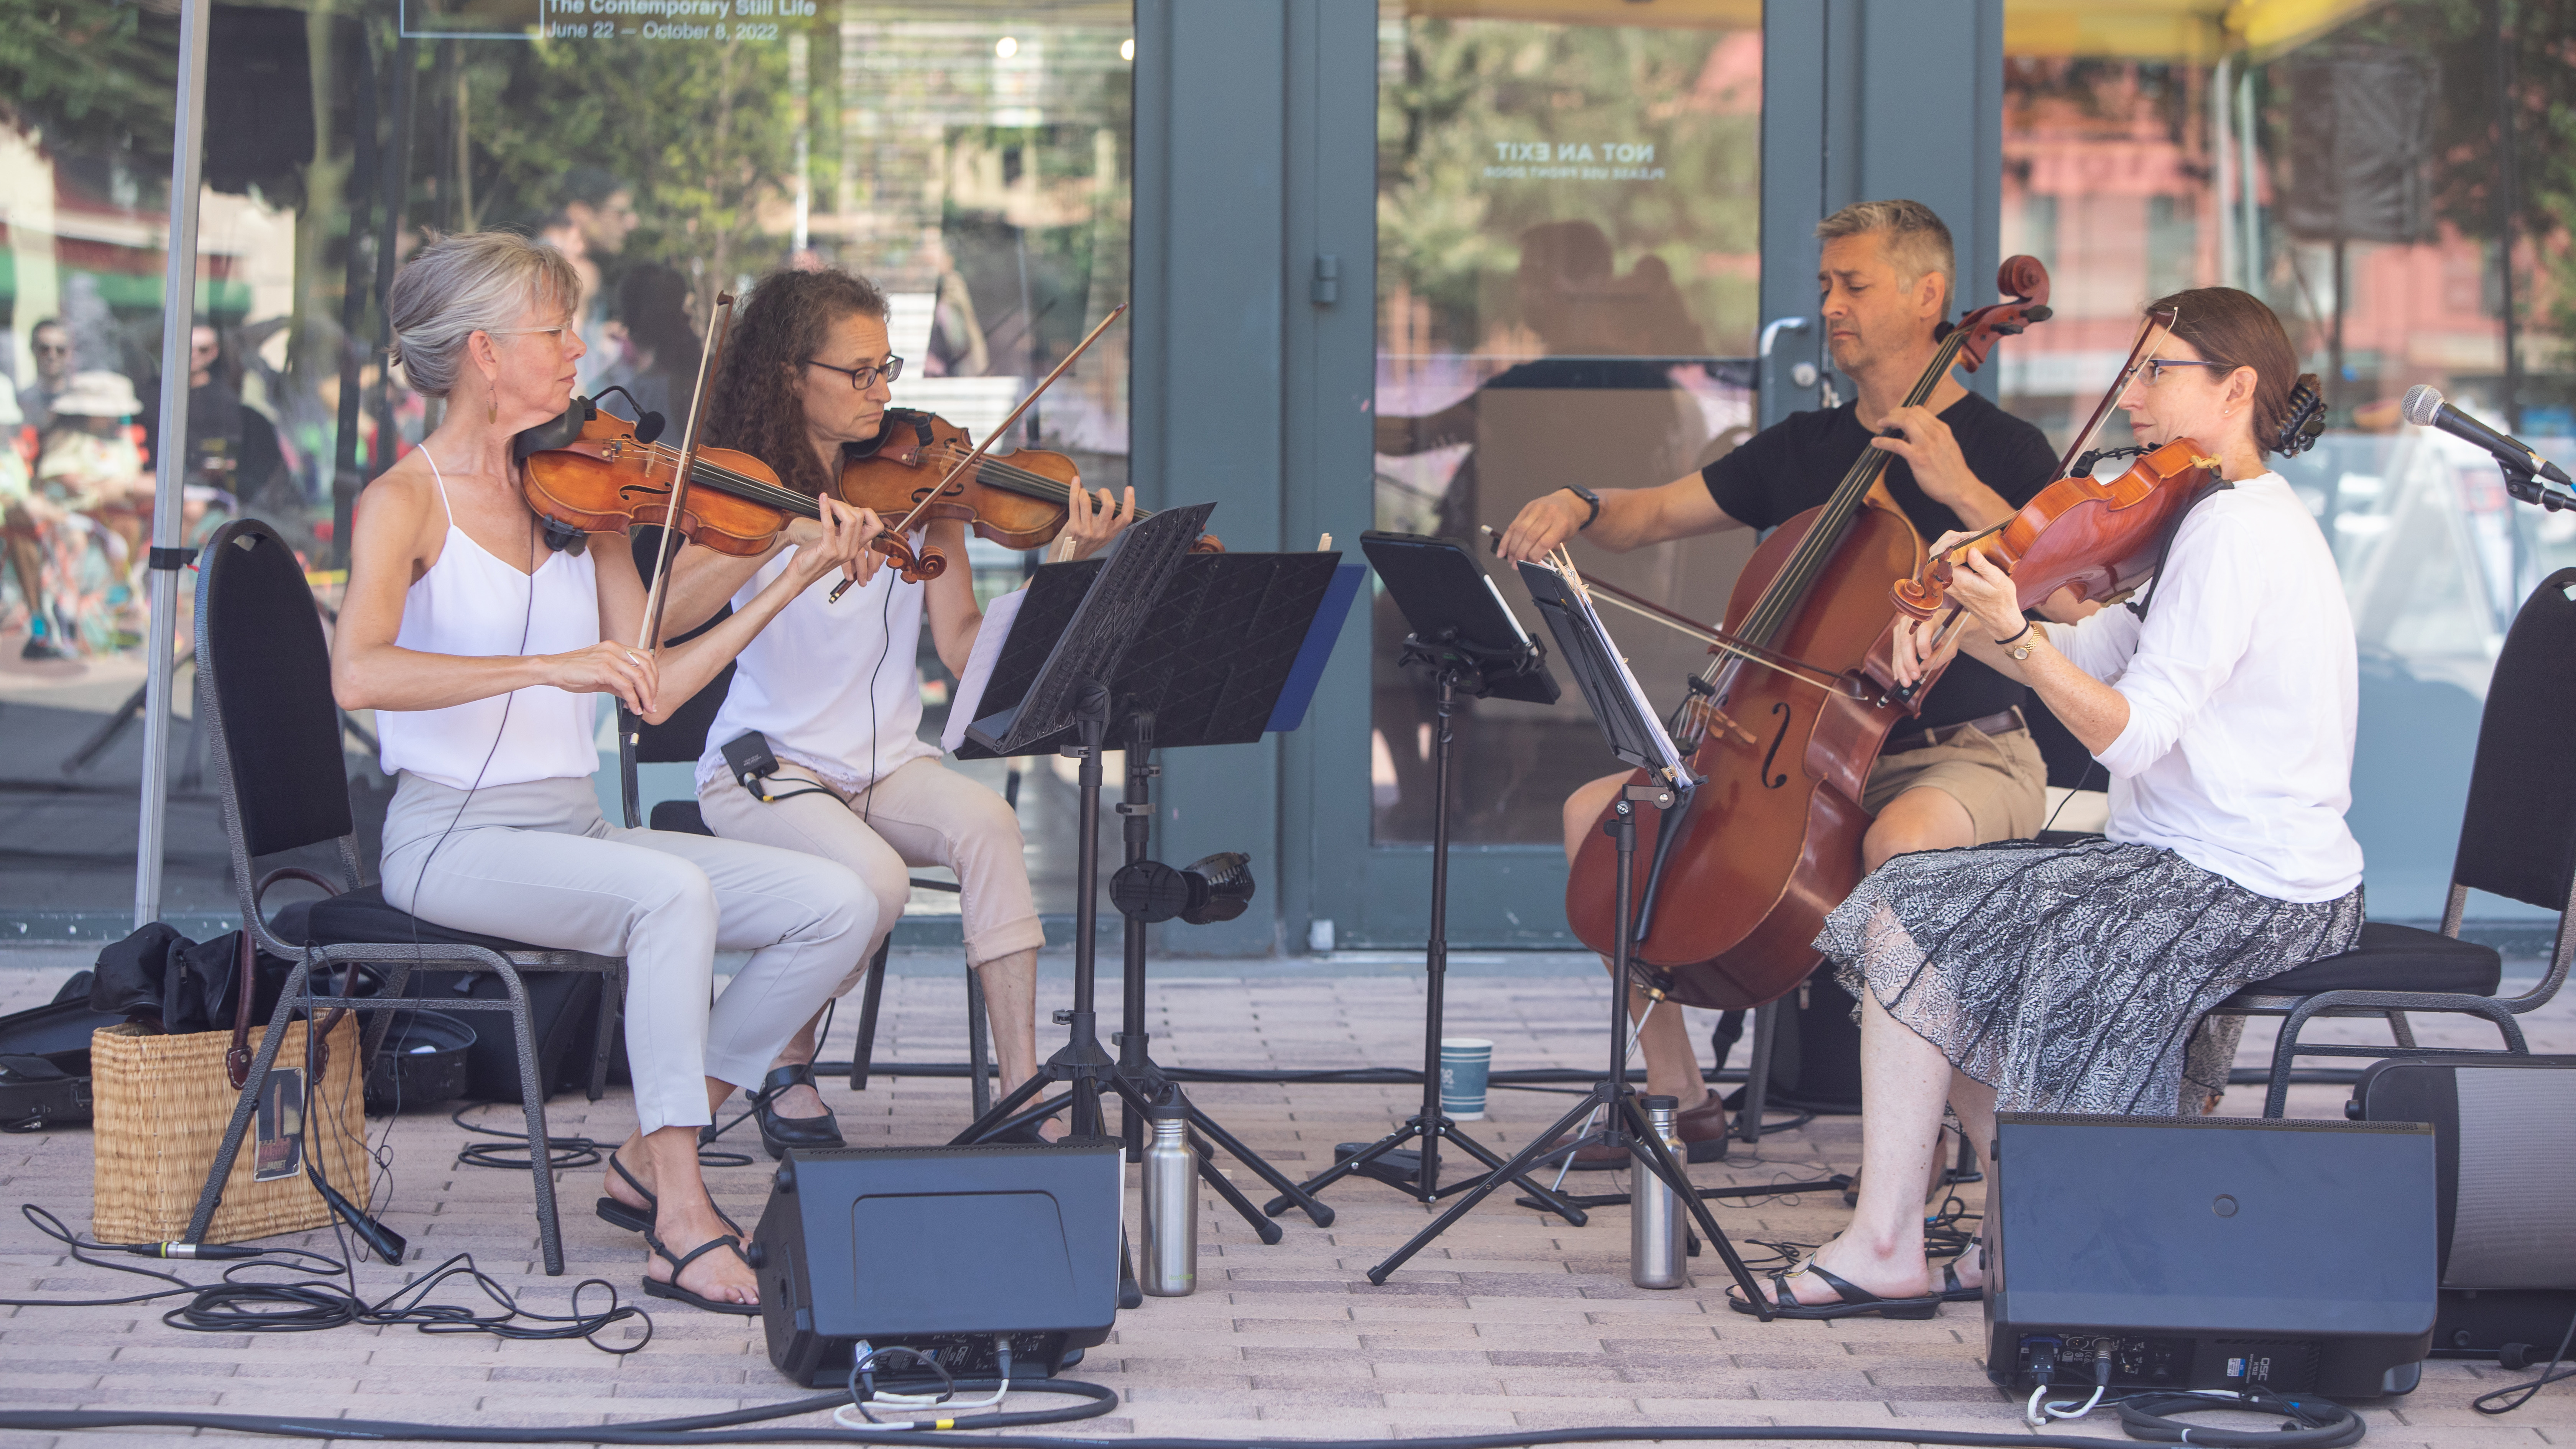 A string quartet of three light skinned women and one light skinned man play on a shady patio. The women each play a violin and the man plays a cello. Large glass windows and a door behind them captures their reflection.